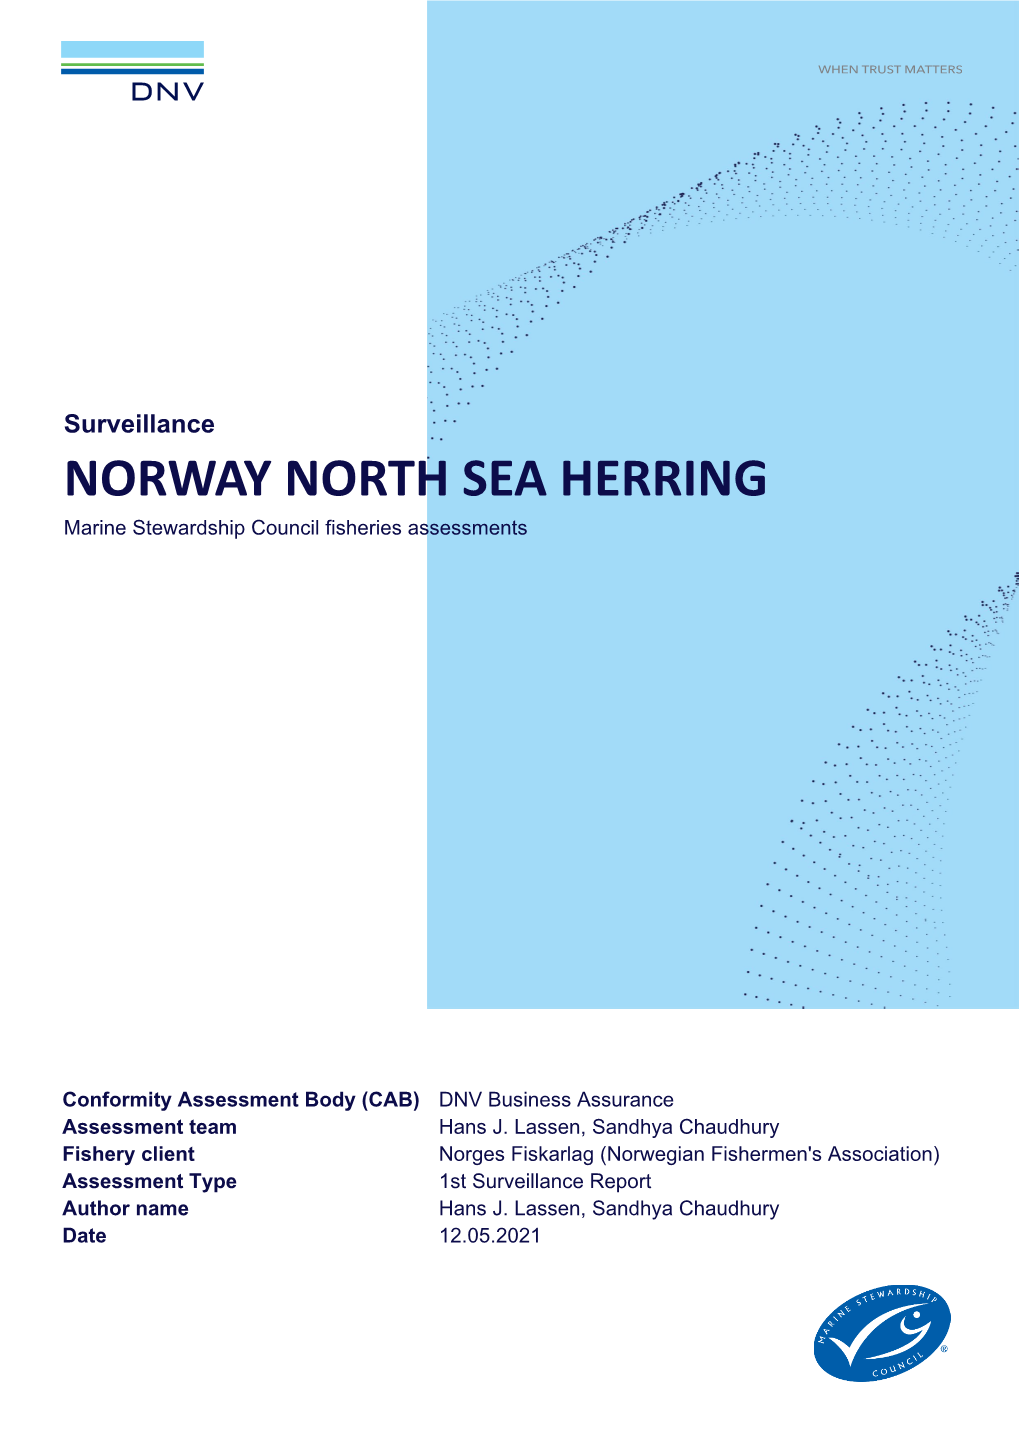 NORWAY NORTH SEA HERRING Marine Stewardship Council Fisheries Assessments